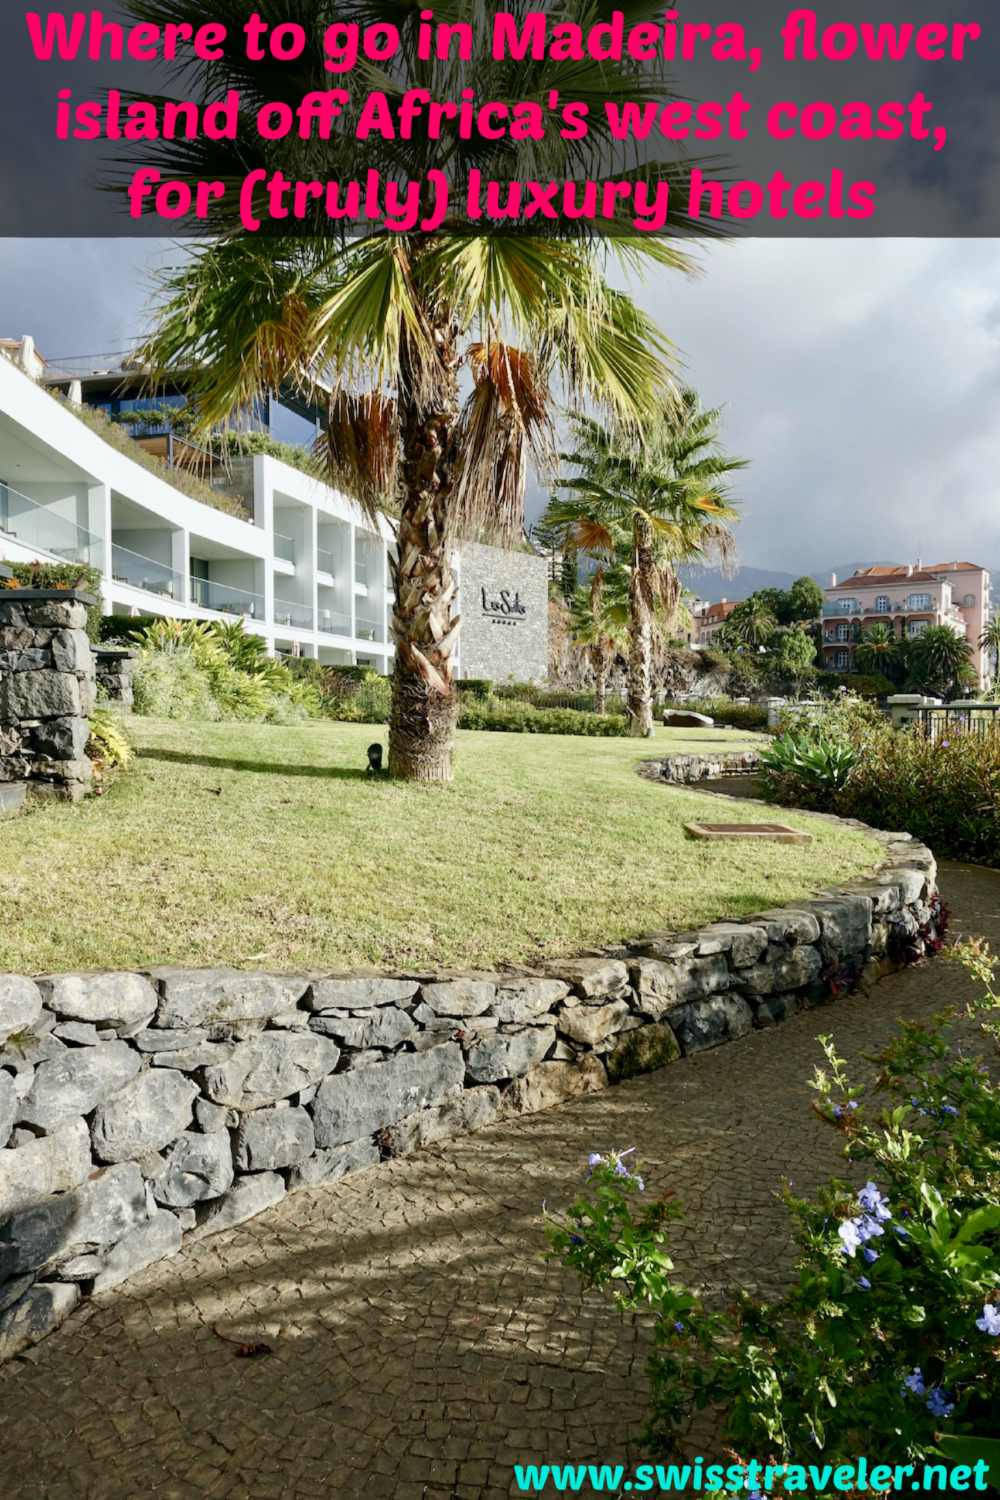 Les Suites at The Cliff Bay & Reid's Palace - luxury hotels in Madeira